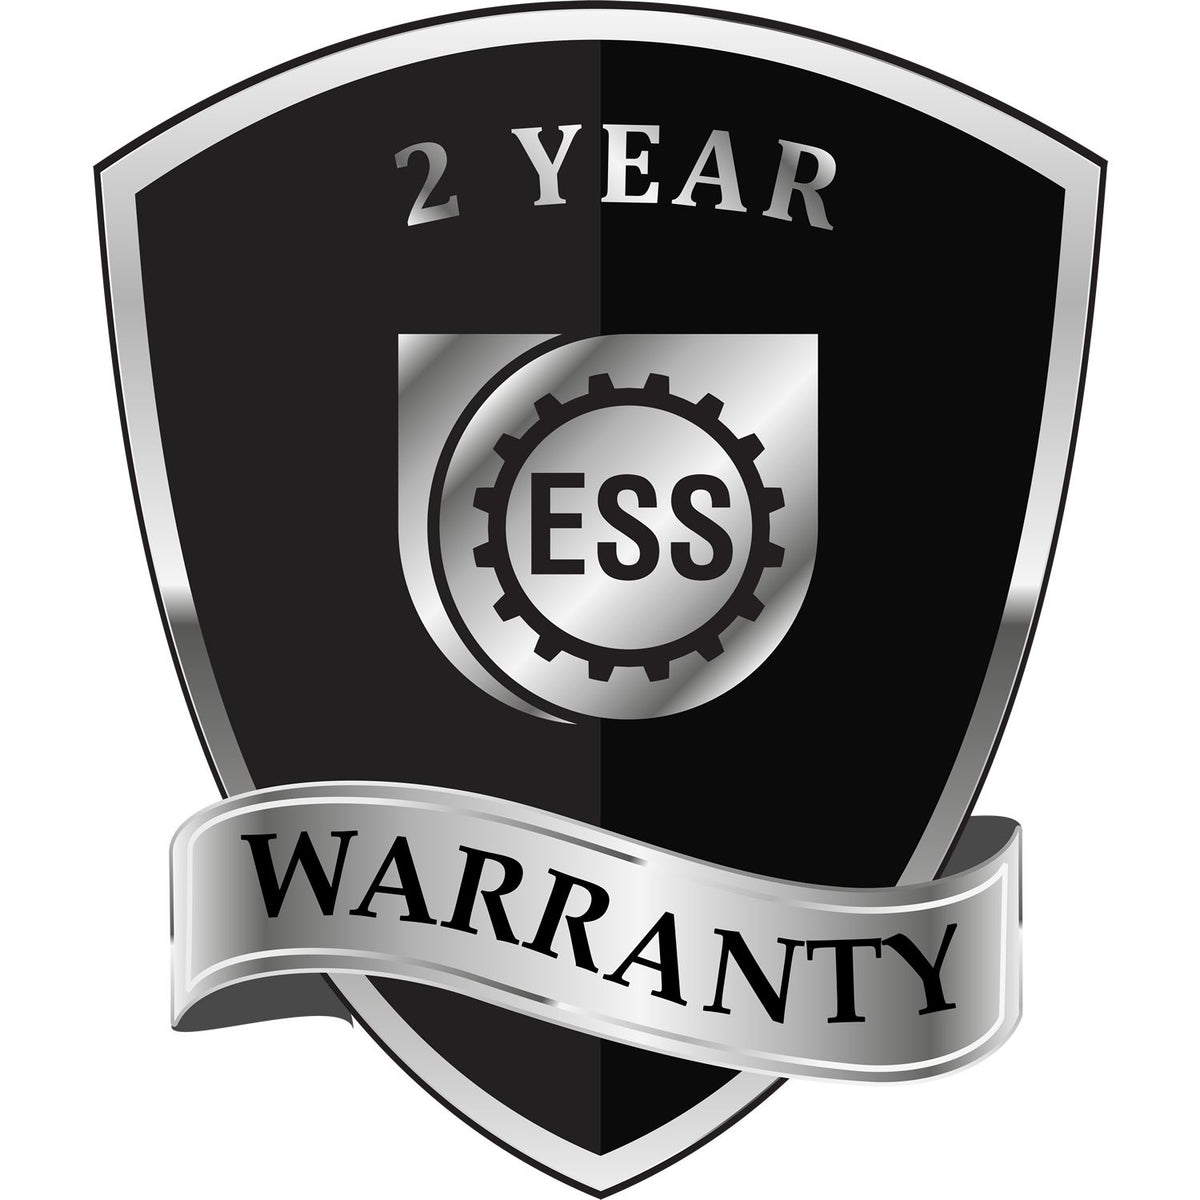 A badge or emblem showing a warranty icon for the Extended Long Reach Alabama Architect Seal Embosser